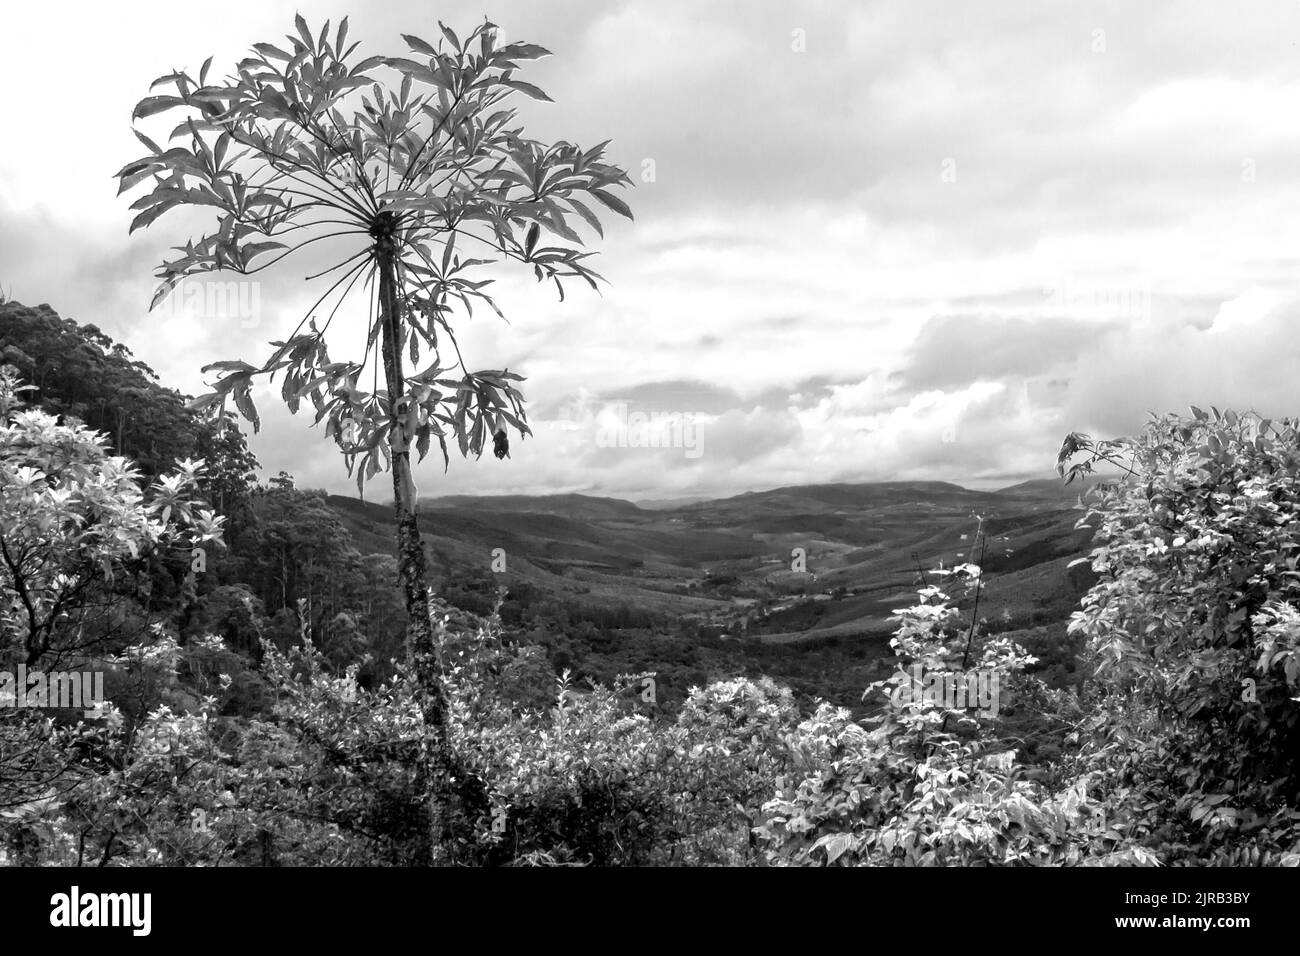 A single grey cabbage tree sapling, in Black and white, with a secluded valley in the background, on an overcast day in Magoebaskloof, South Africa. Stock Photo